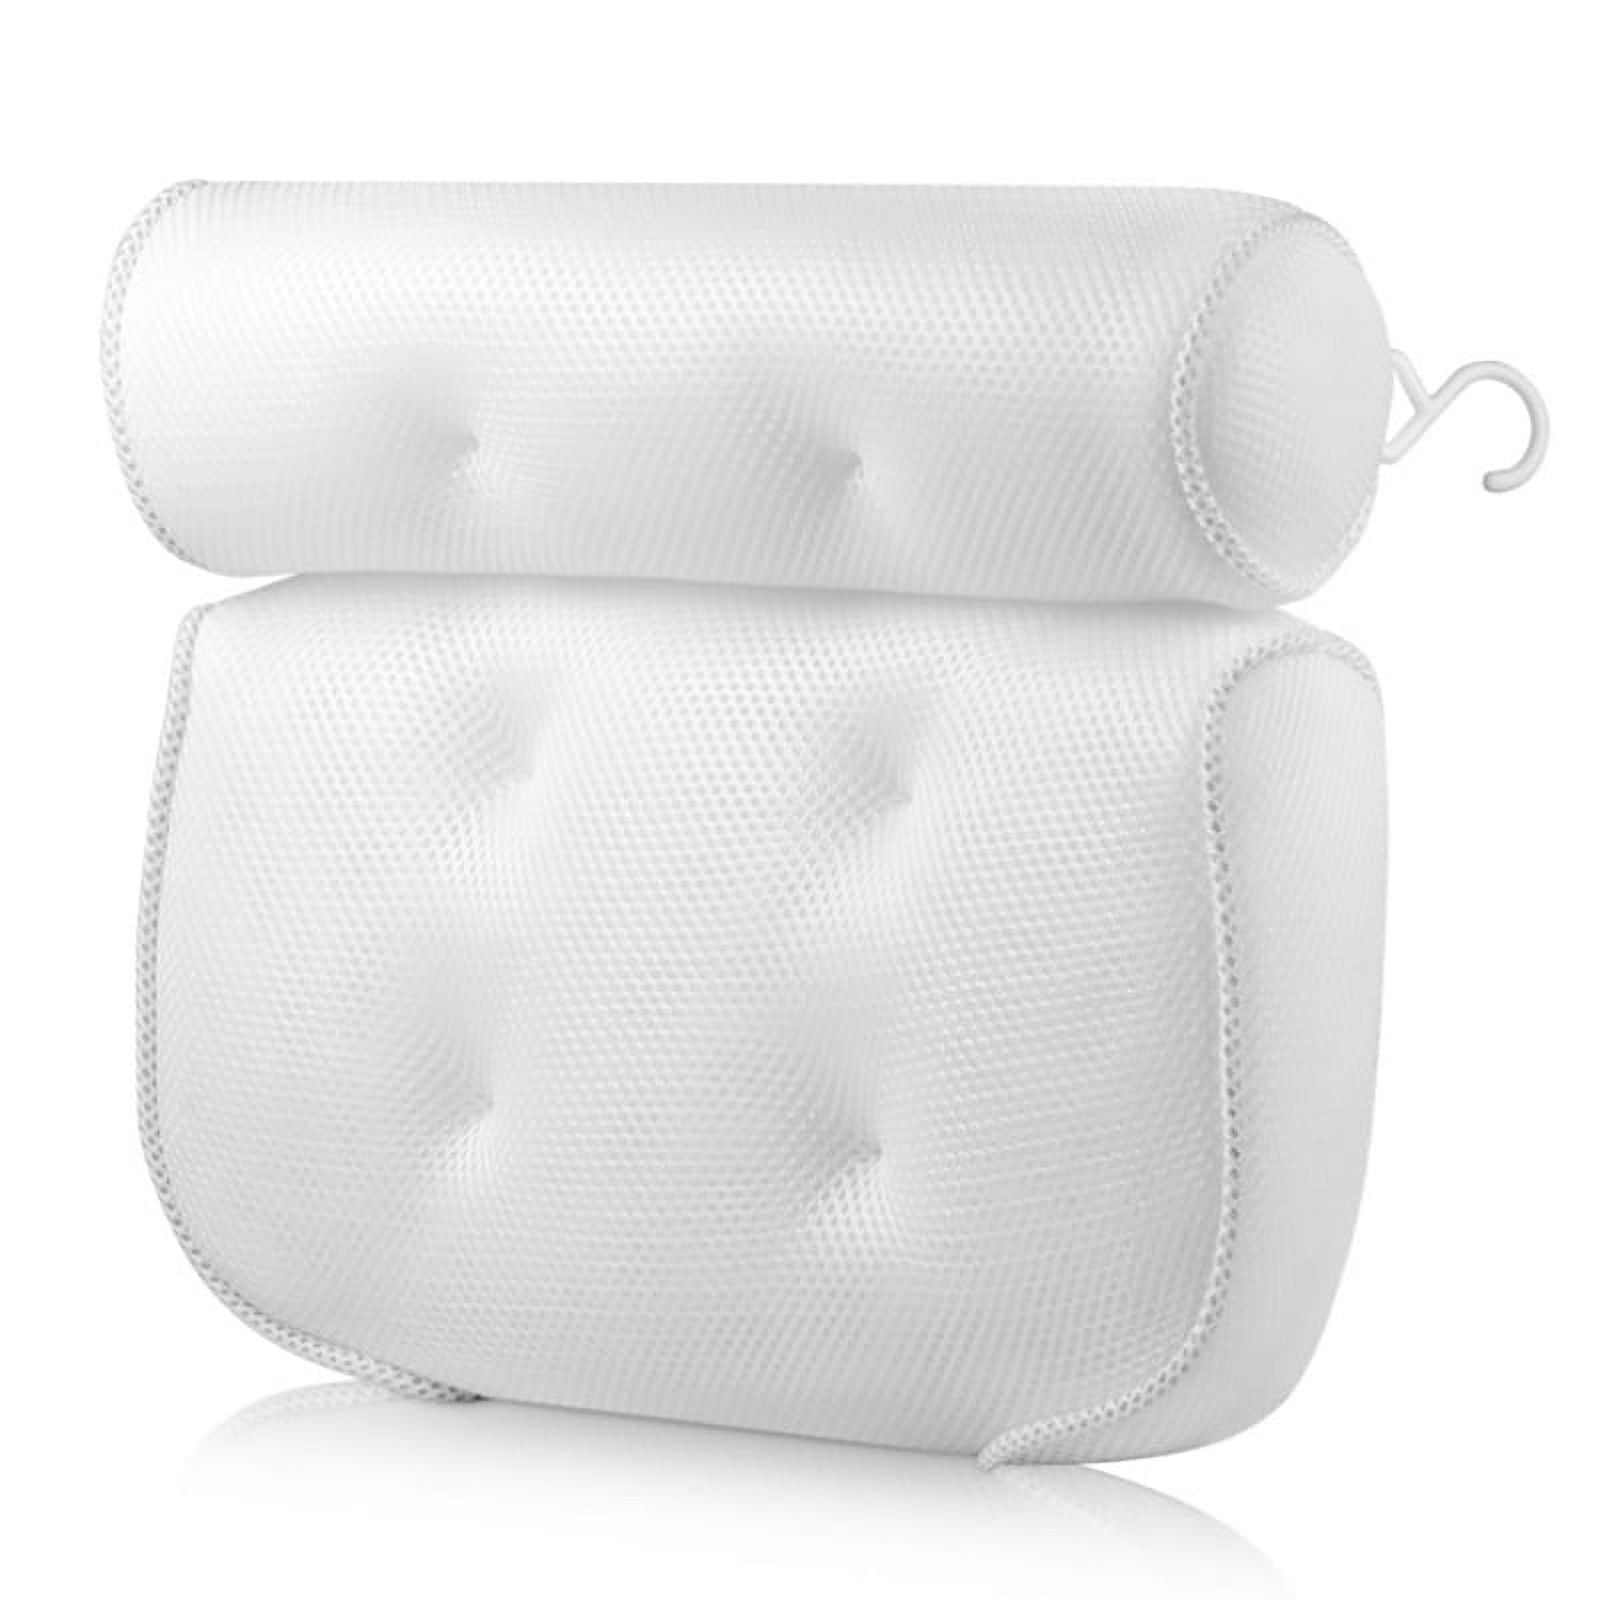  Bathtub Pillow for Neck and Back Support with 6 Non-Slip  Suction Cups & Drying Hook - Machine Washable Bath Tub Pillow Headrest for  Standard, Soaking & Straight Back Tubs - Bath